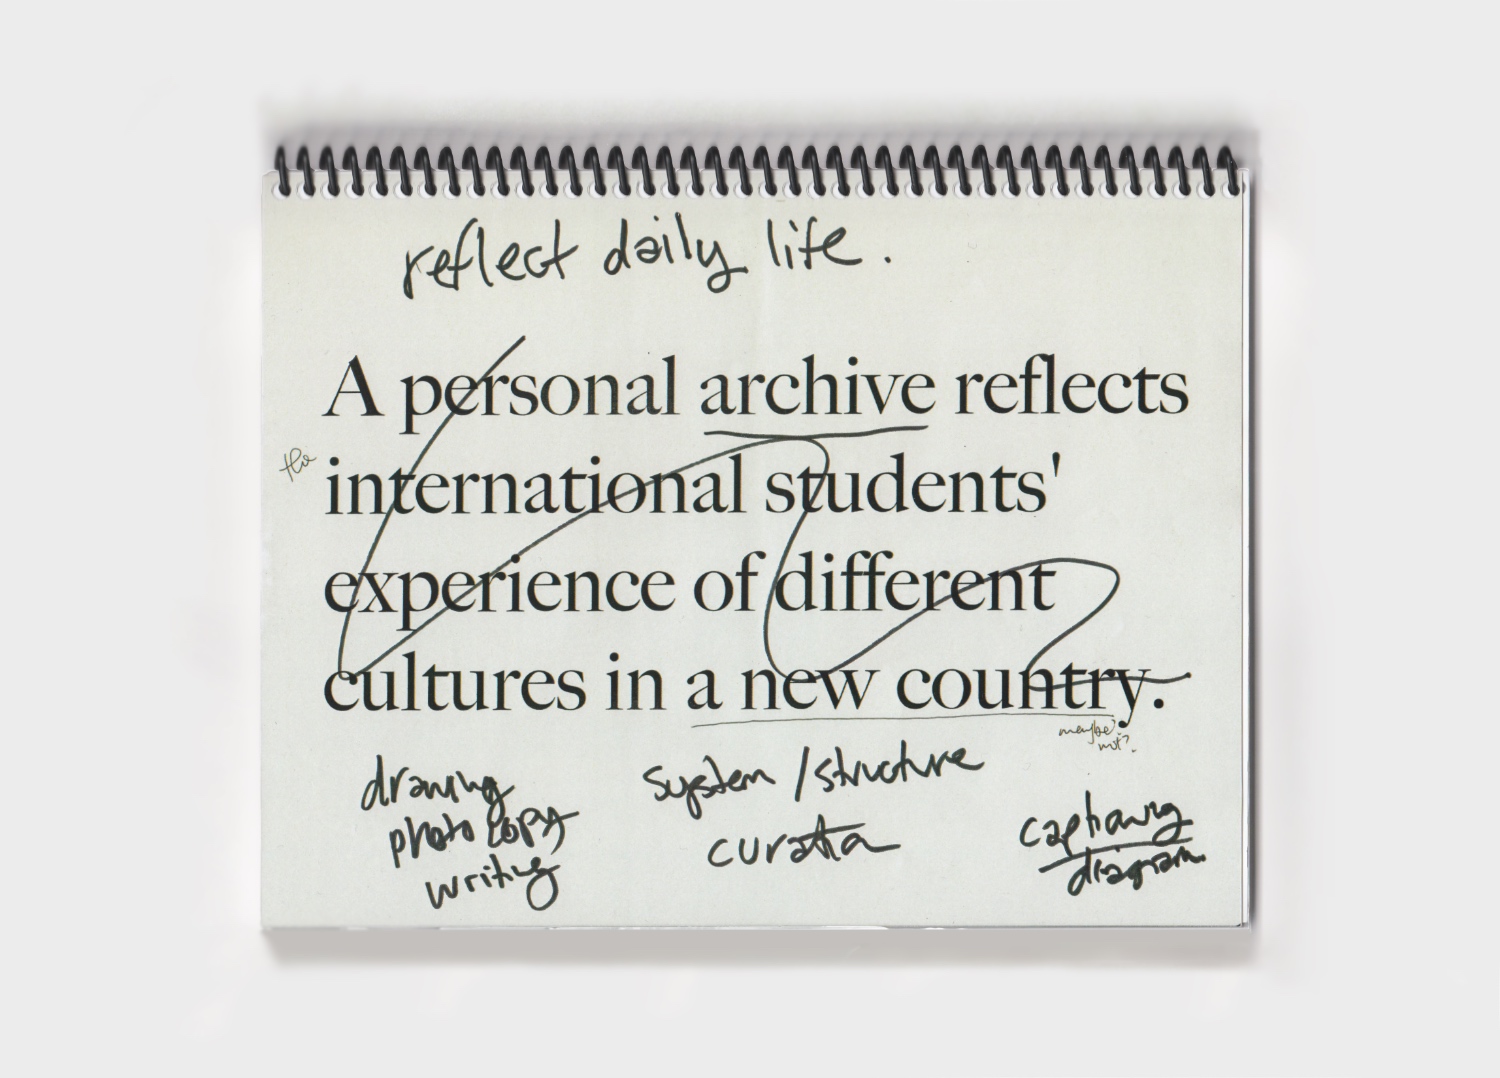 A personal archive reflect international students’ experience